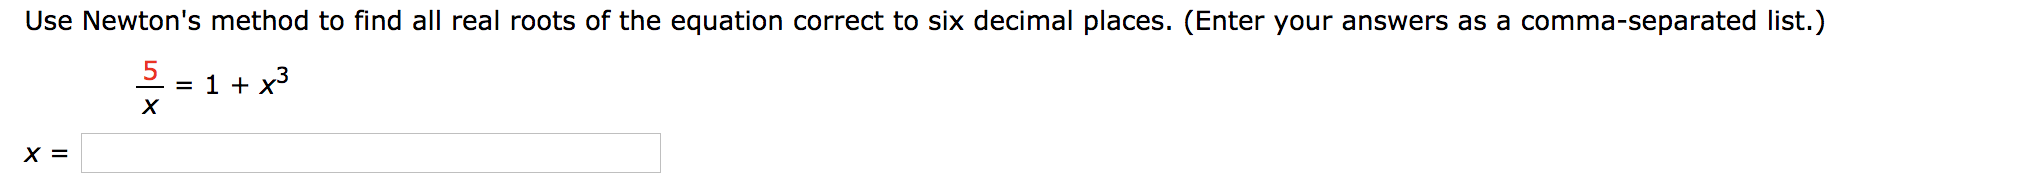 Use Newton's method to find all real roots of the equation correct to six decimal places. (Enter your answers as a comma-separated list.)
= 1 + x3
х
х %3
